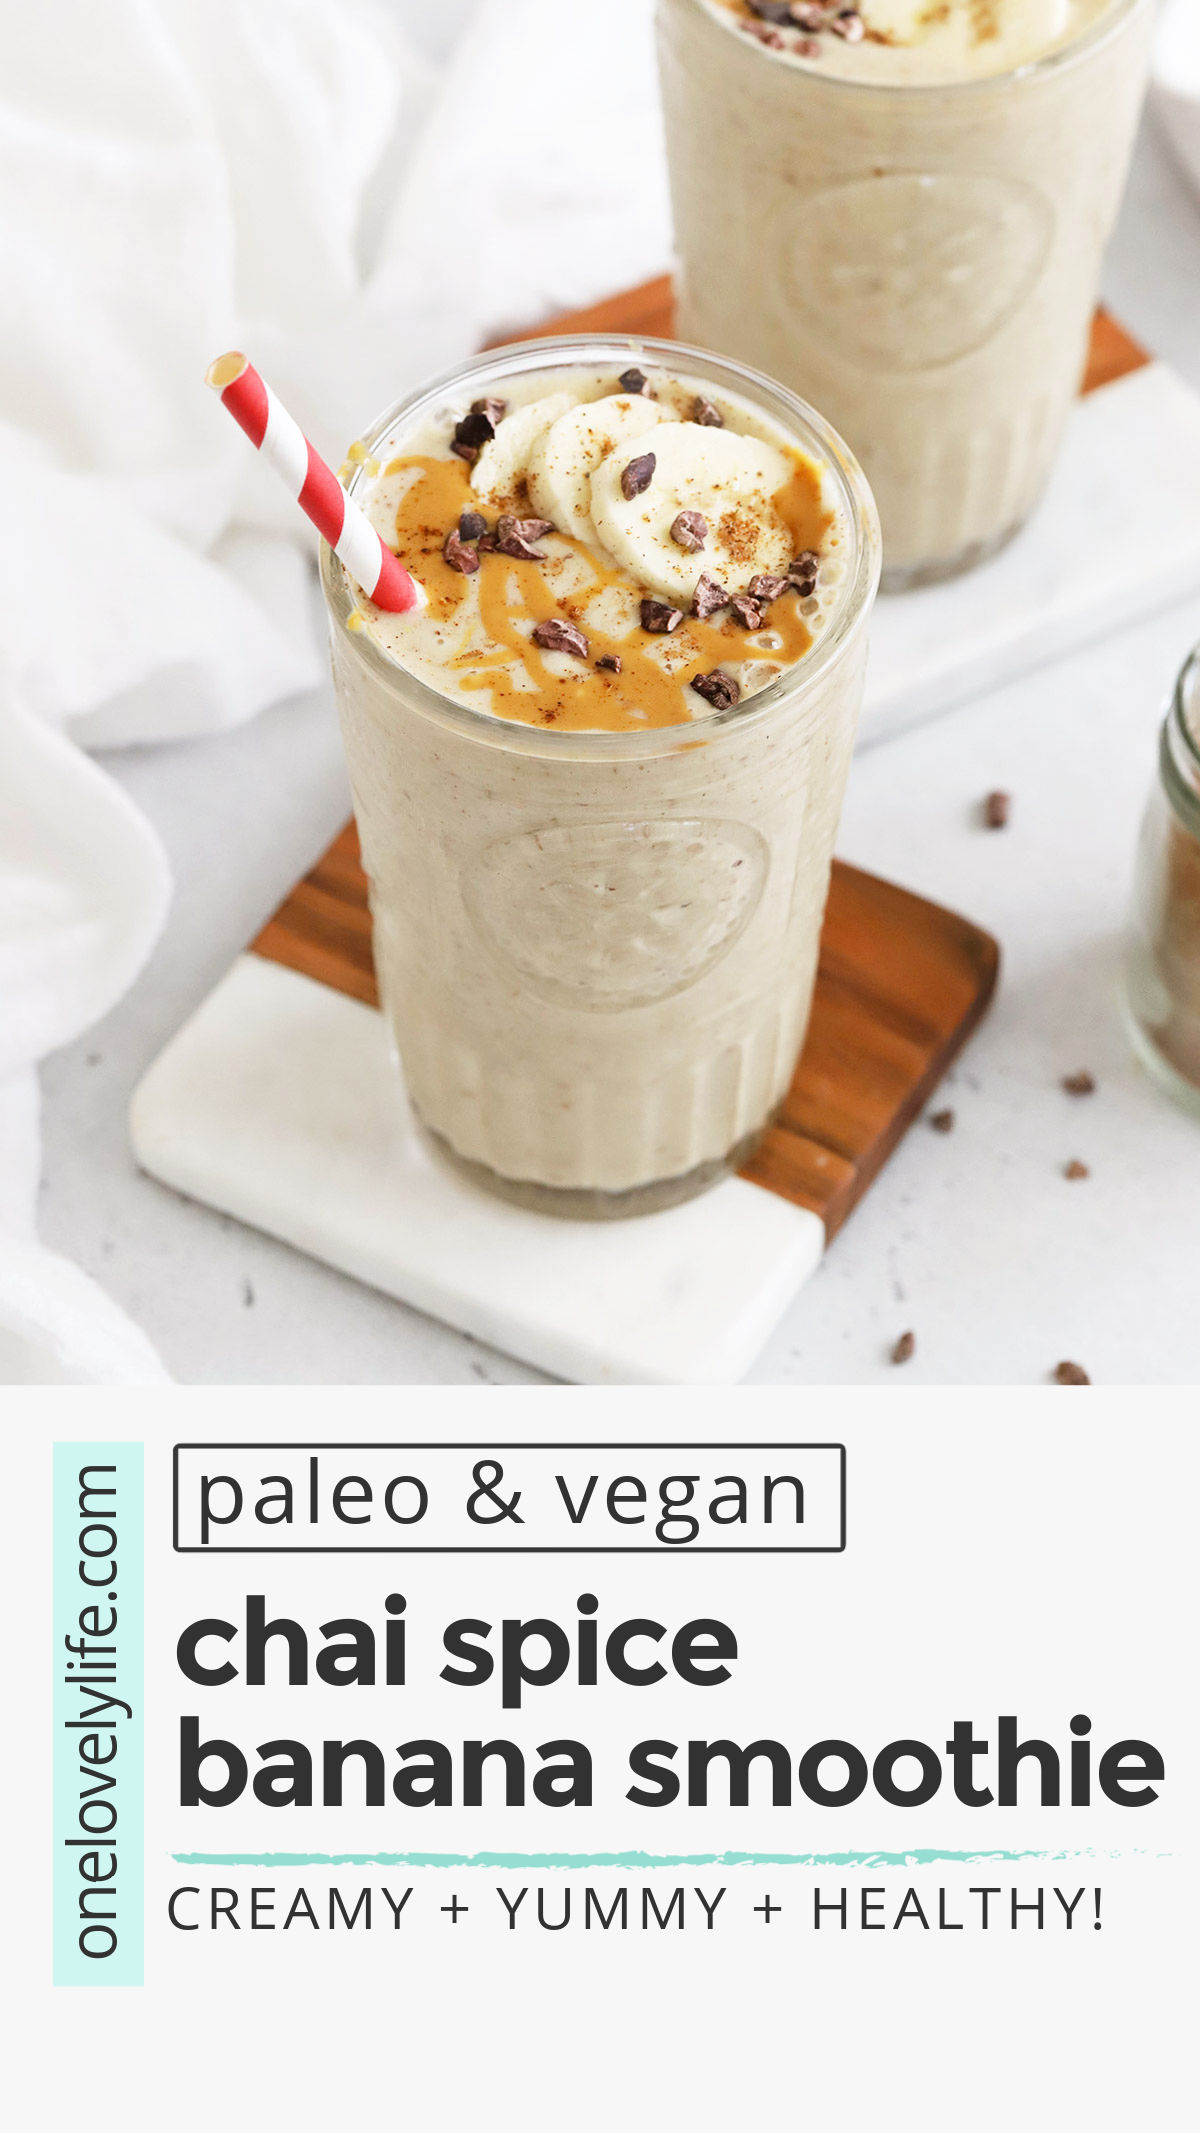 Chai Spiced Banana Smoothies - This chai banana smoothie is such a yummy change of pace! It's perfect all year long. (Paleo, Vegan) // Chai Spice Banana Smoothie // Banana Smoothie Recipe // Banana Chai Smoothie // Fall Smoothie // Winter Smoothie // Paleo Smoothie // Vegan Smoothie #smoothie #chai #banana #chaispice